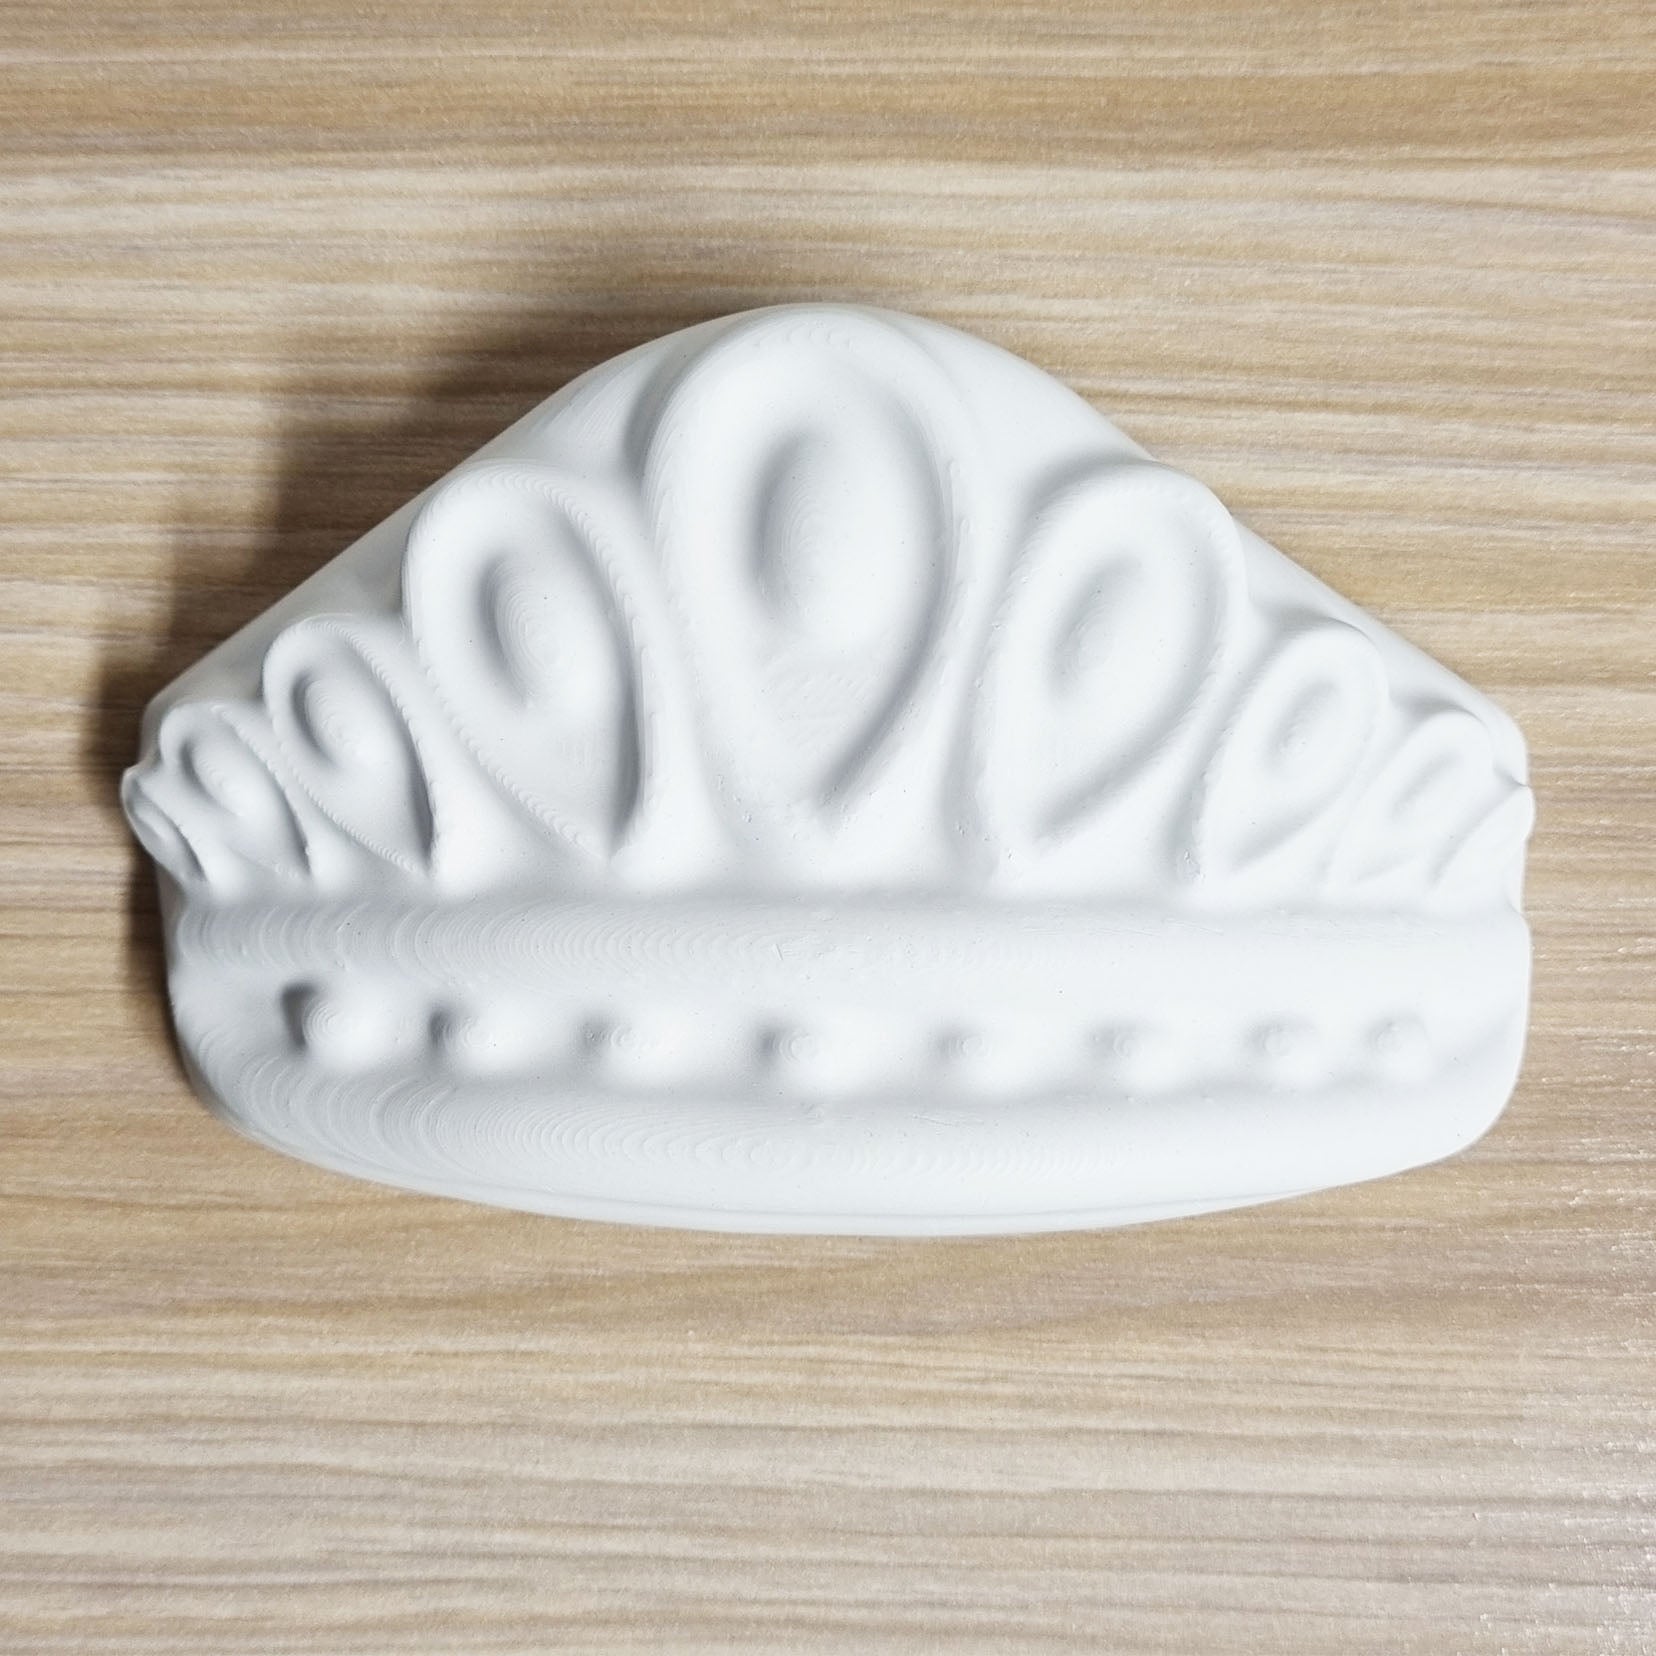 Tiara Mould | Truly Personal | Bath Bomb, Soap, Resin, Chocolate, Jelly, Wax Melts Mold